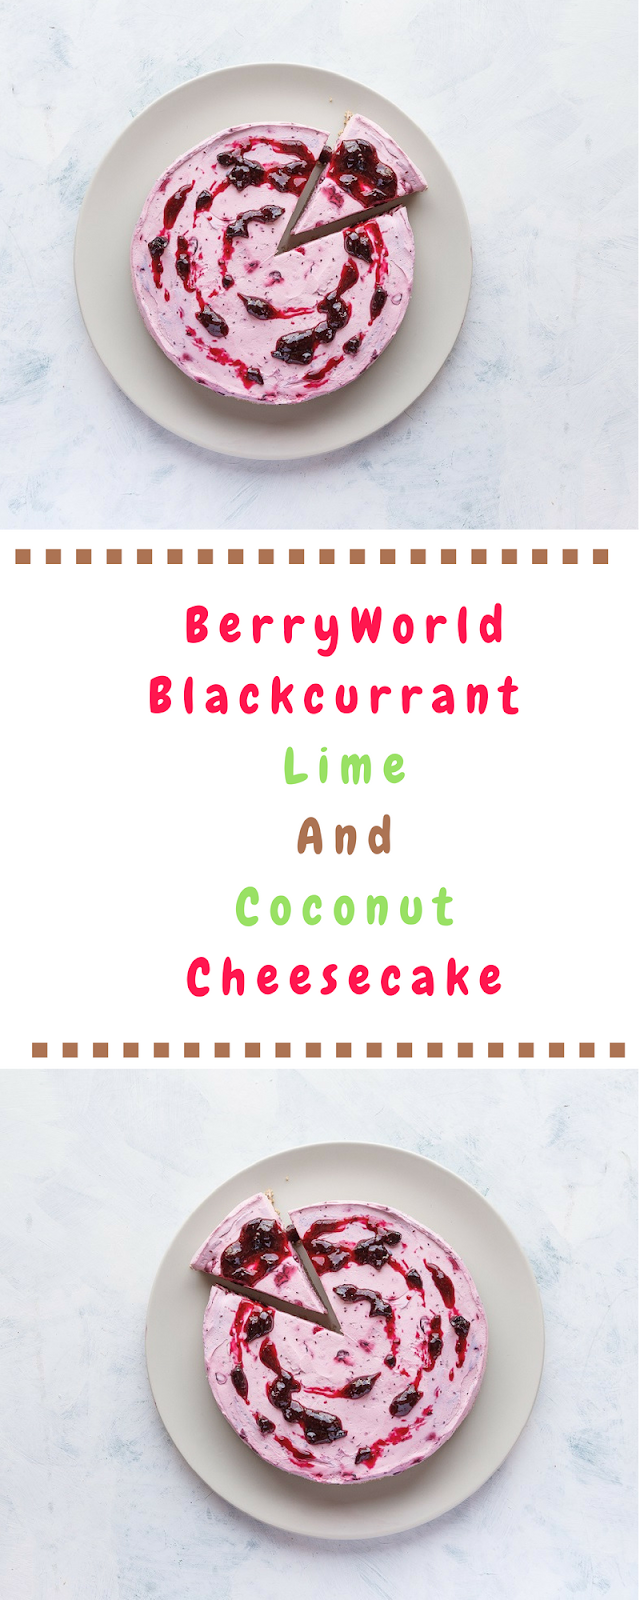 BerryWorld Blackcurrant, Lime And Coconut Cheesecake